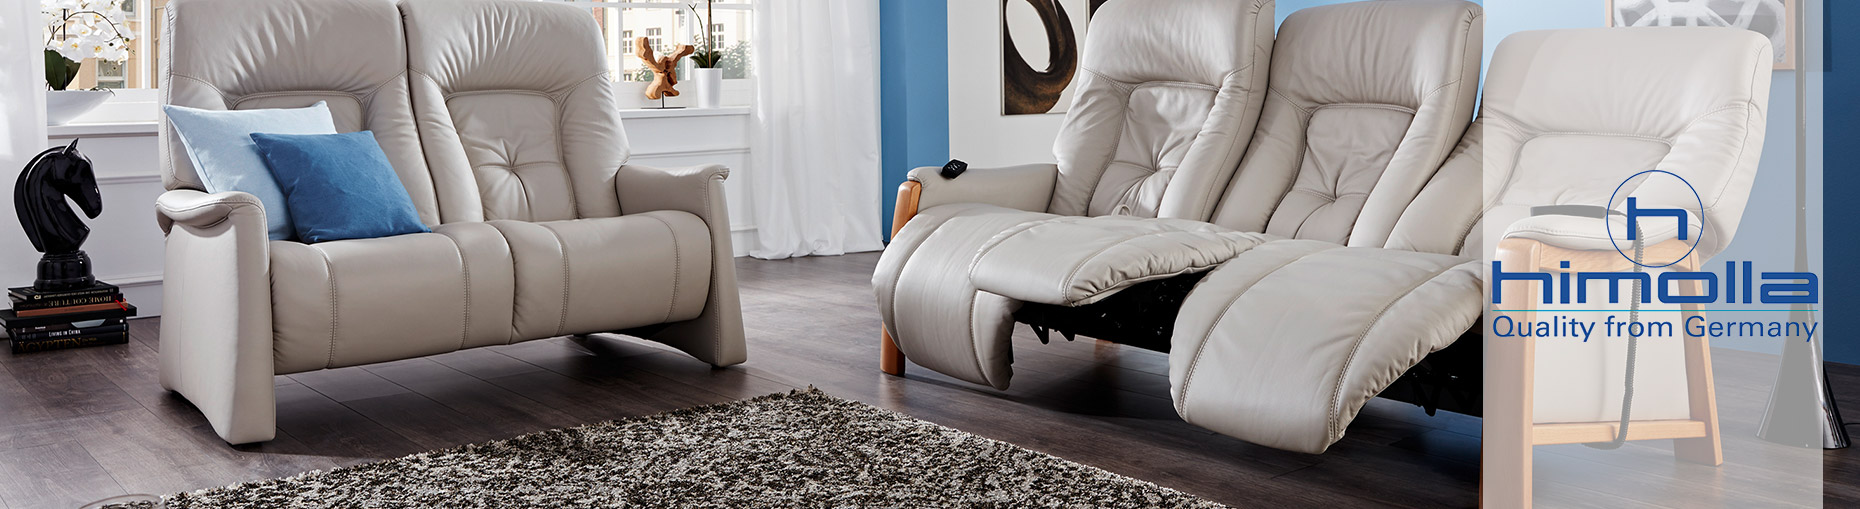 Themse Garde Sofa Collection by Himolla  at Forrest Furnishing